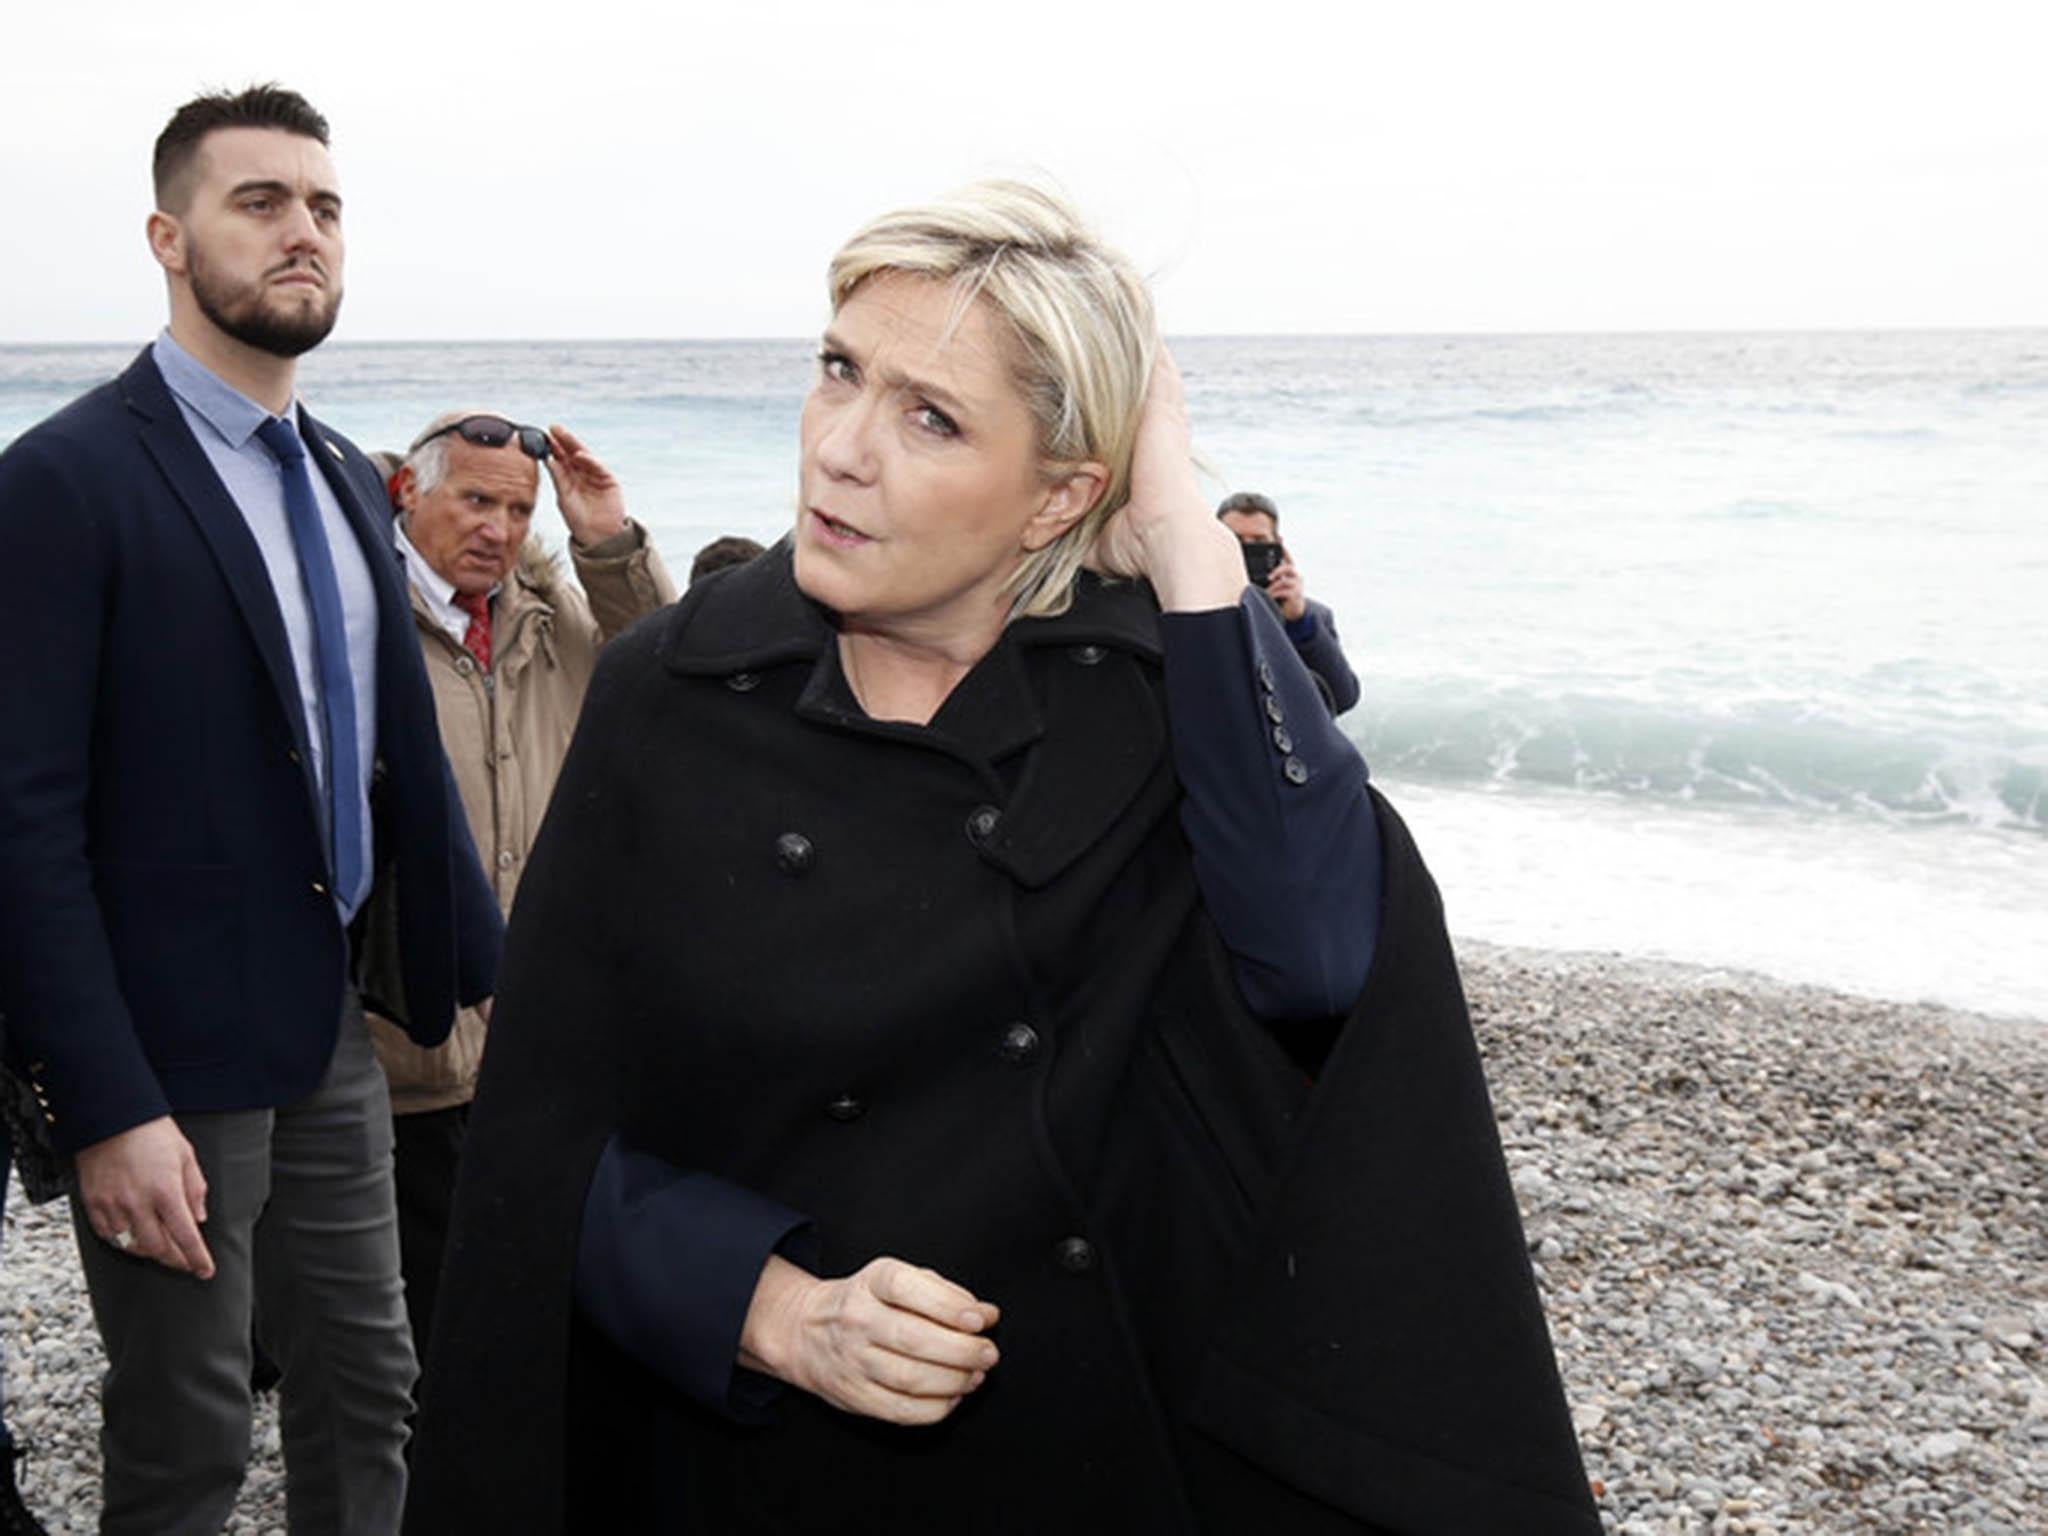 Le Pen on the campaign trail in Nice